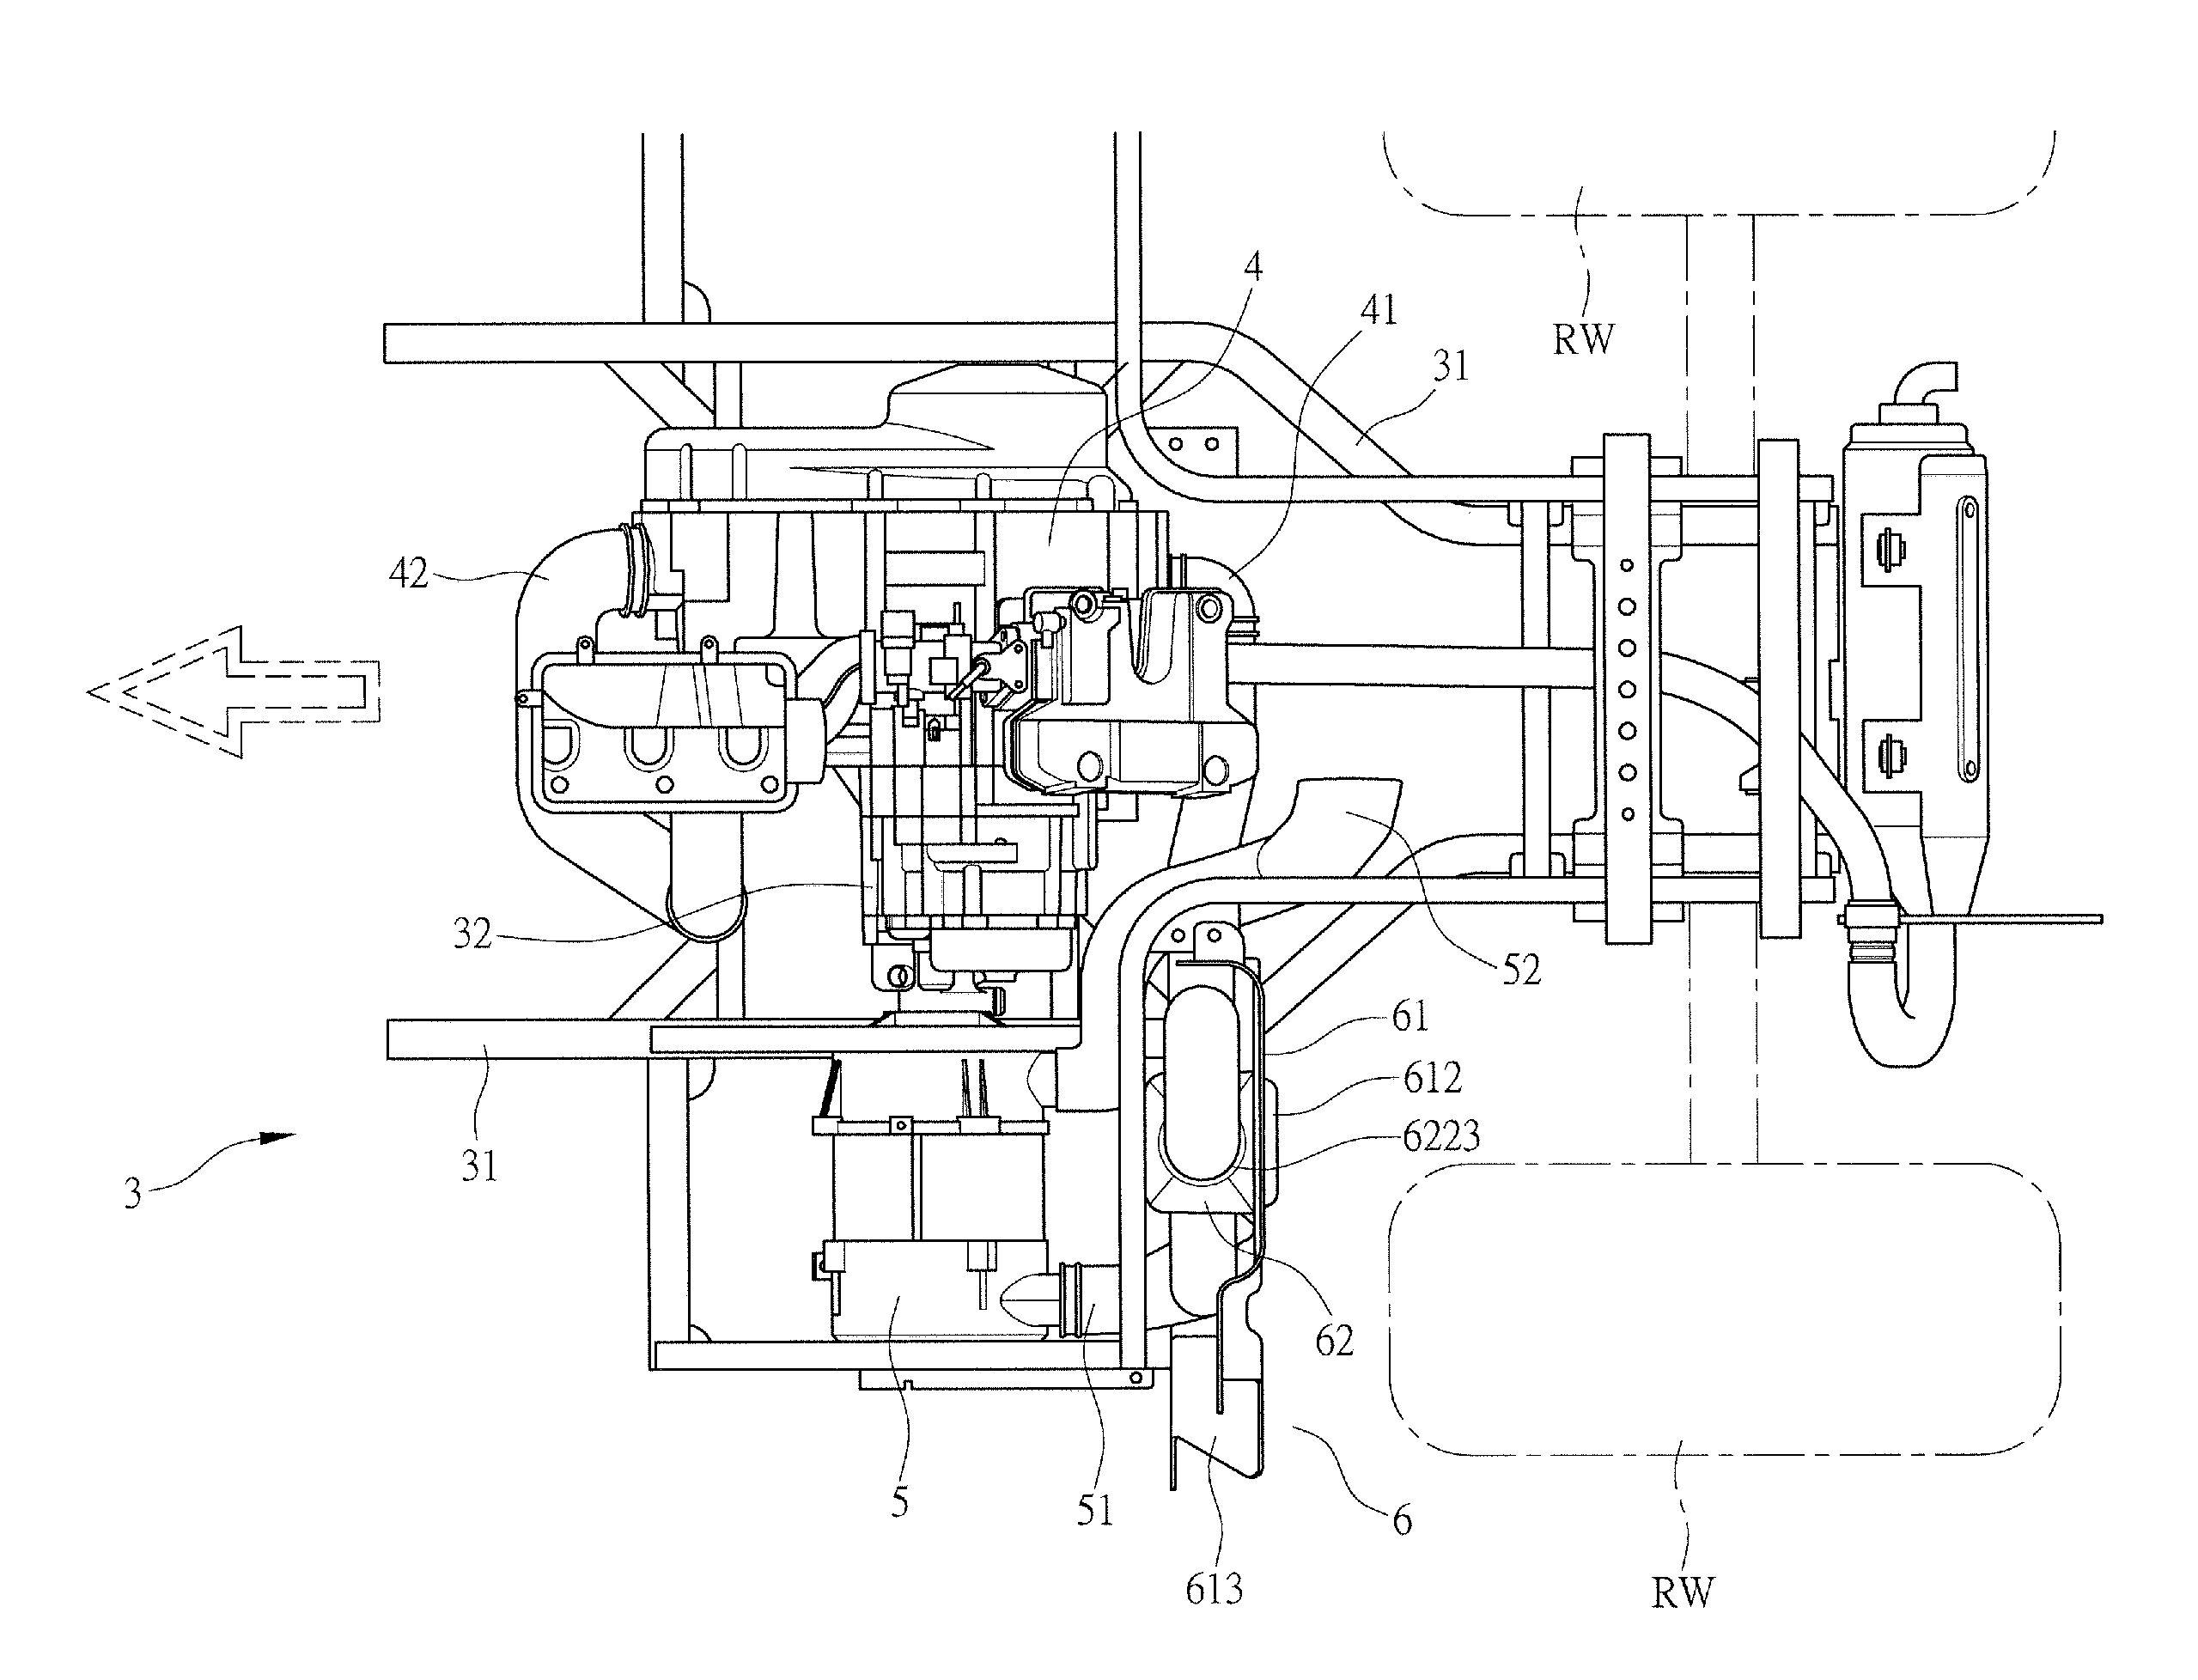 Cooling air intake device for vehicle